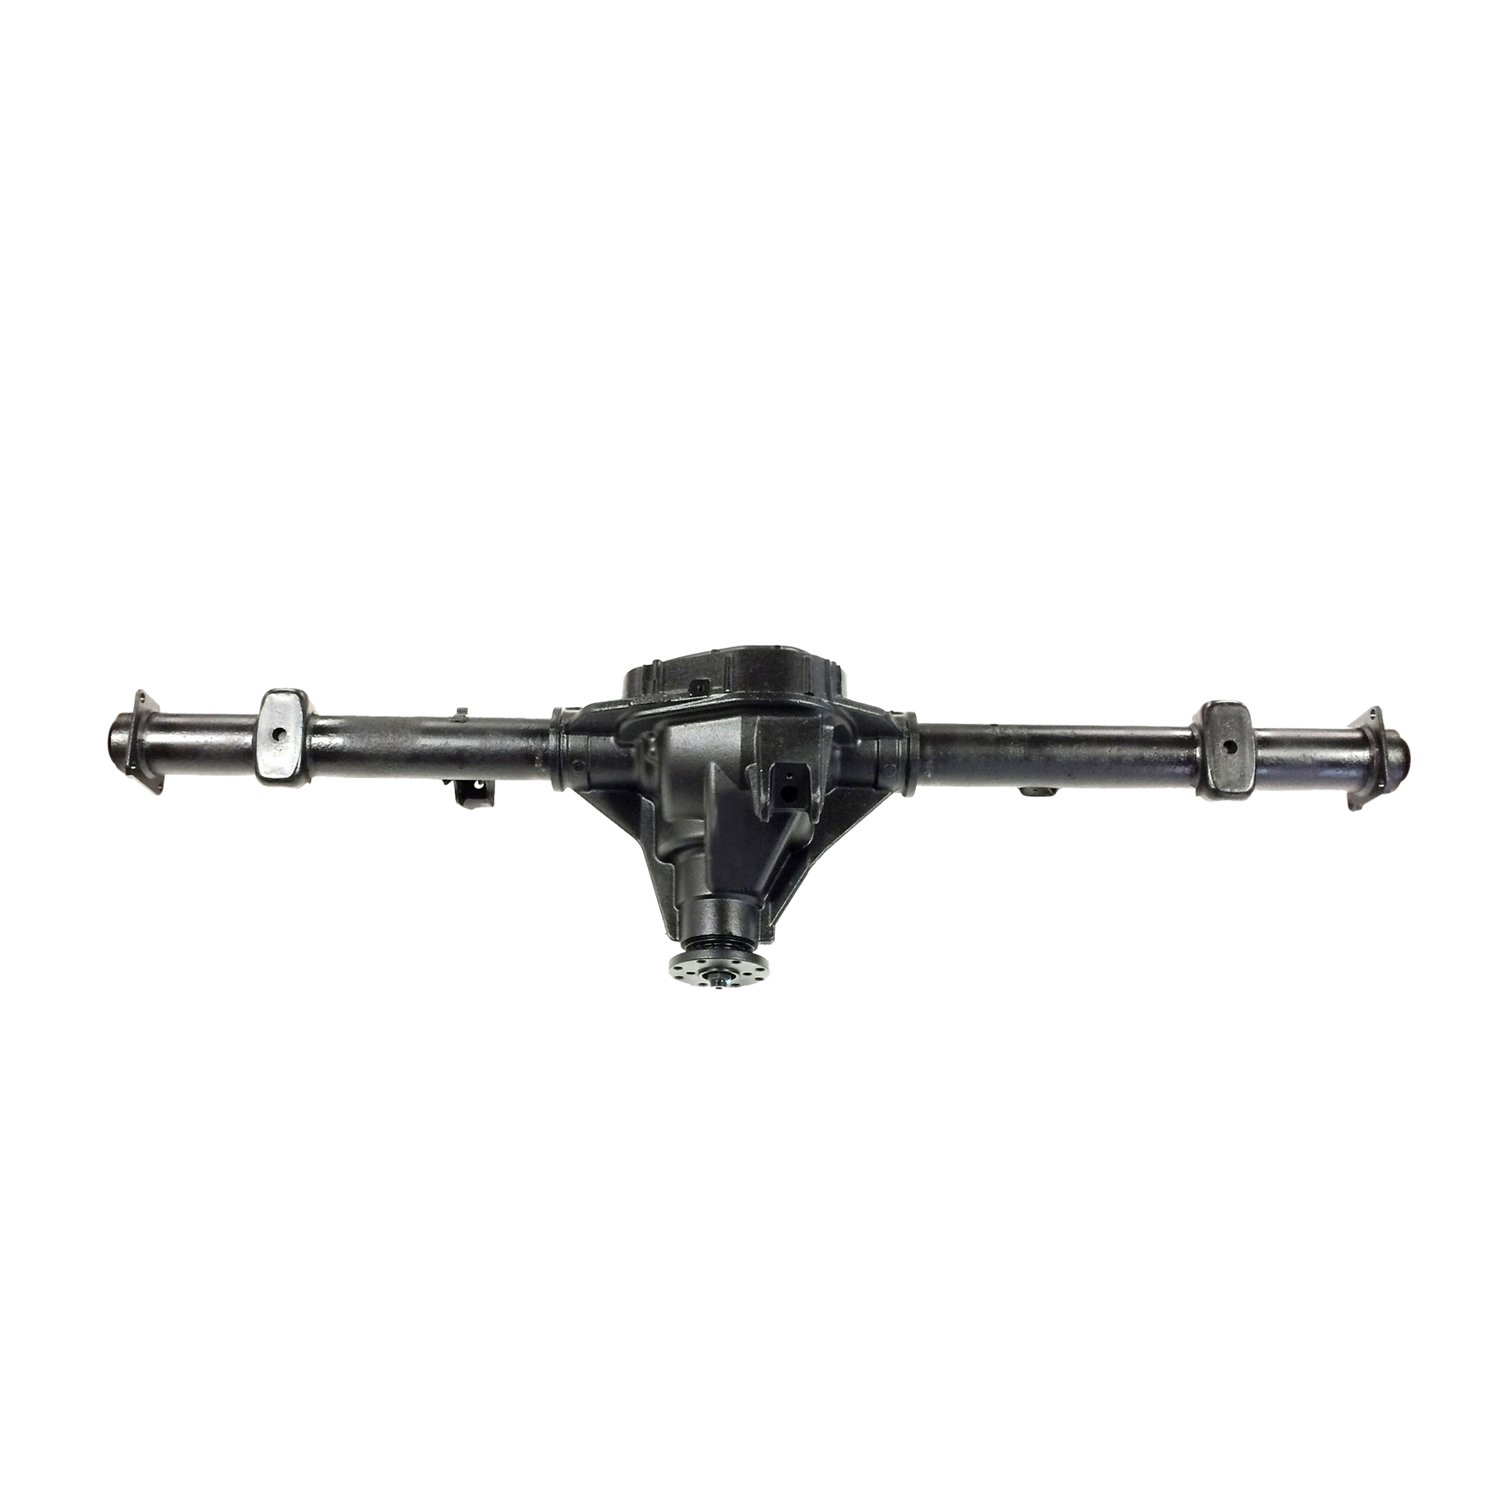 Remanufactured Complete Axle Assembly for 9.75" 12-13 F150 3.31, 6 Lug, Posi LSD